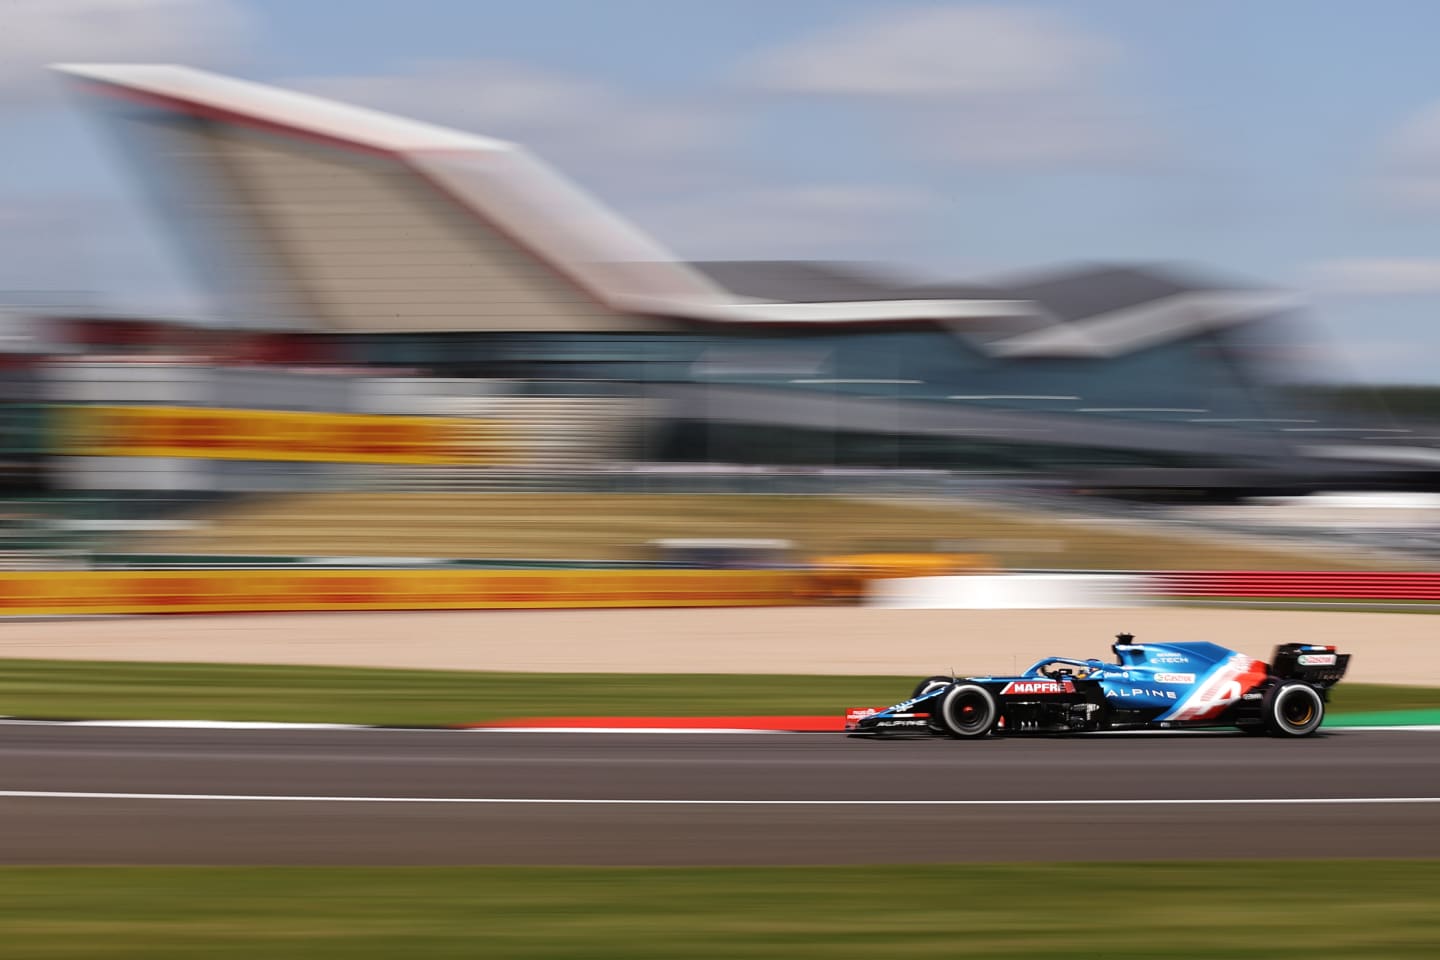 NORTHAMPTON, ENGLAND - JULY 16: Fernando Alonso of Spain driving the (14) Alpine A521 Renault during practice ahead of the F1 Grand Prix of Great Britain at Silverstone on July 16, 2021 in Northampton, England. (Photo by Lars Baron/Getty Images)